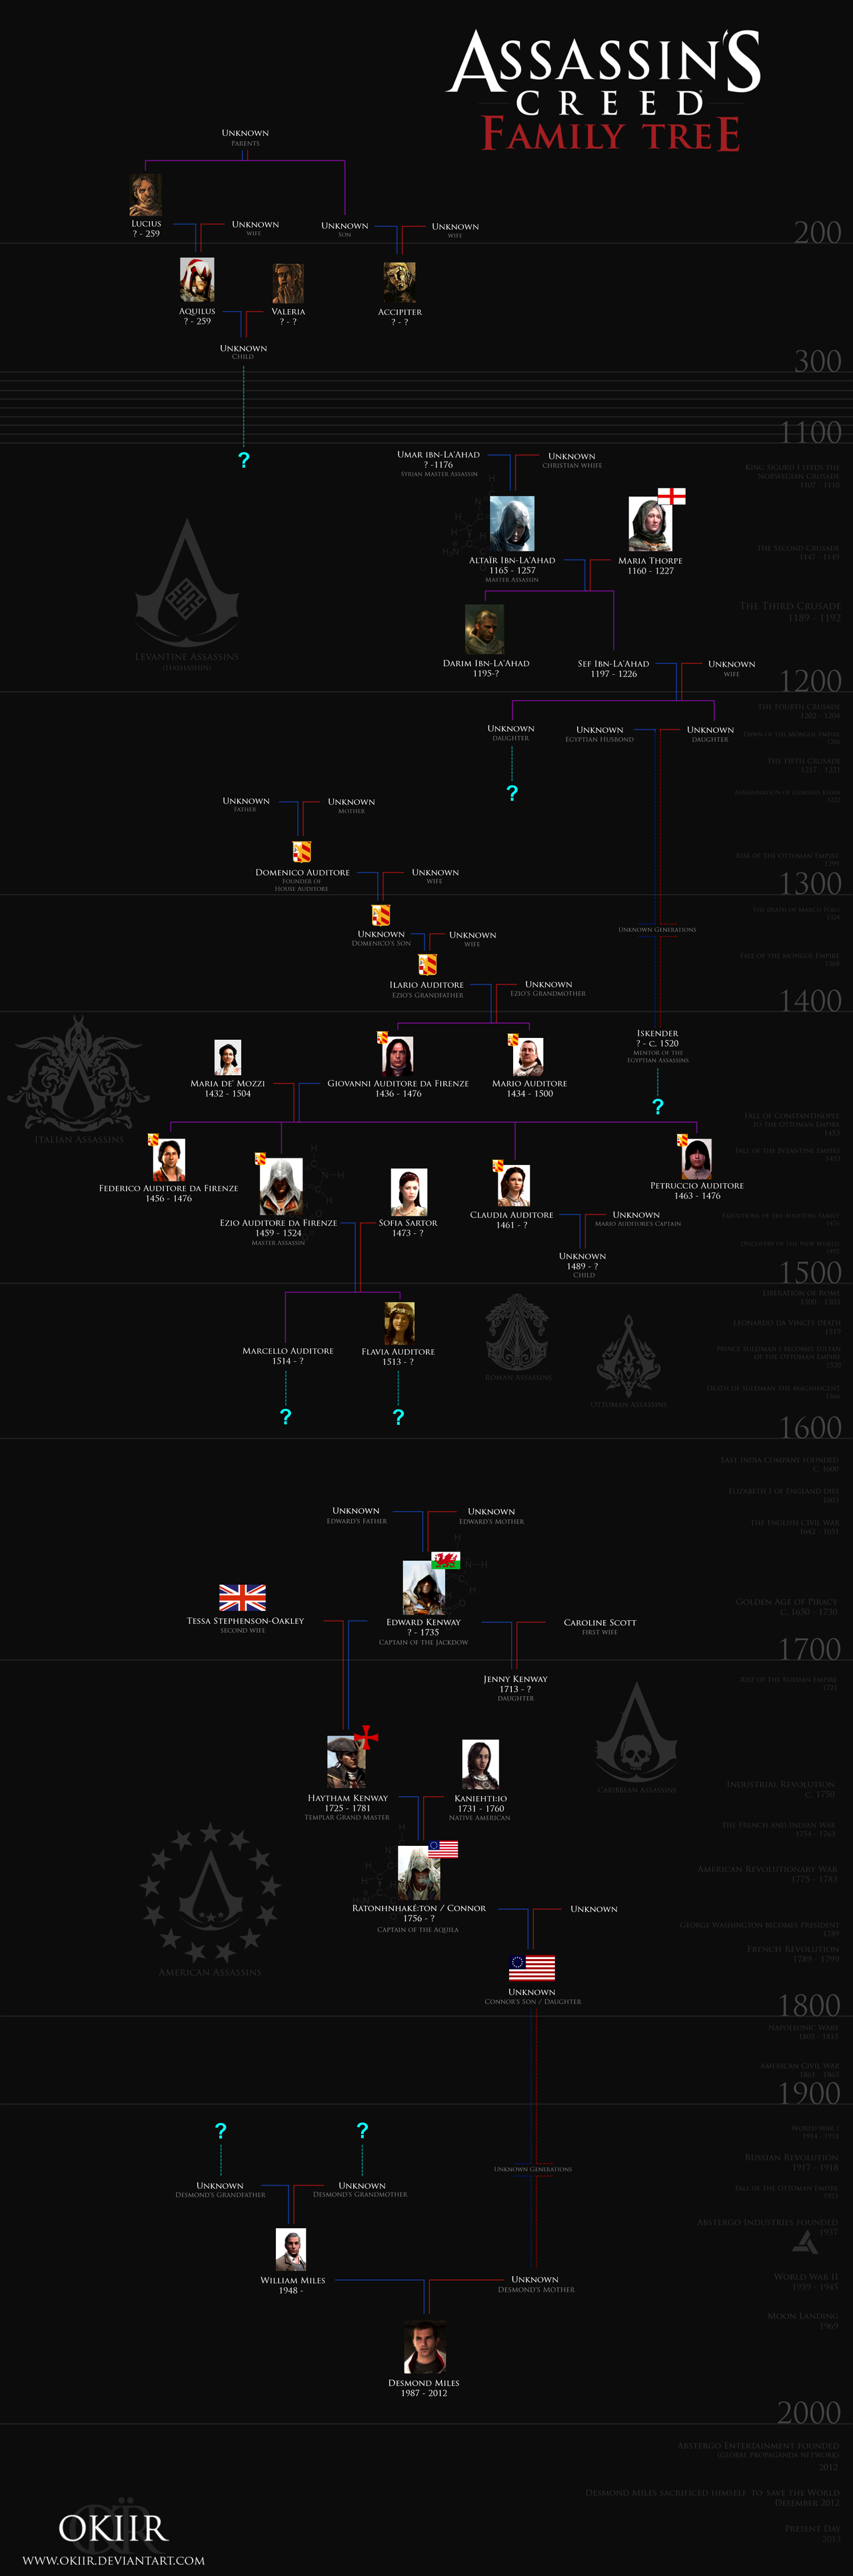 assassin_s_creed__desmond_miles__family_tree_by_okiir-d5429ao.png